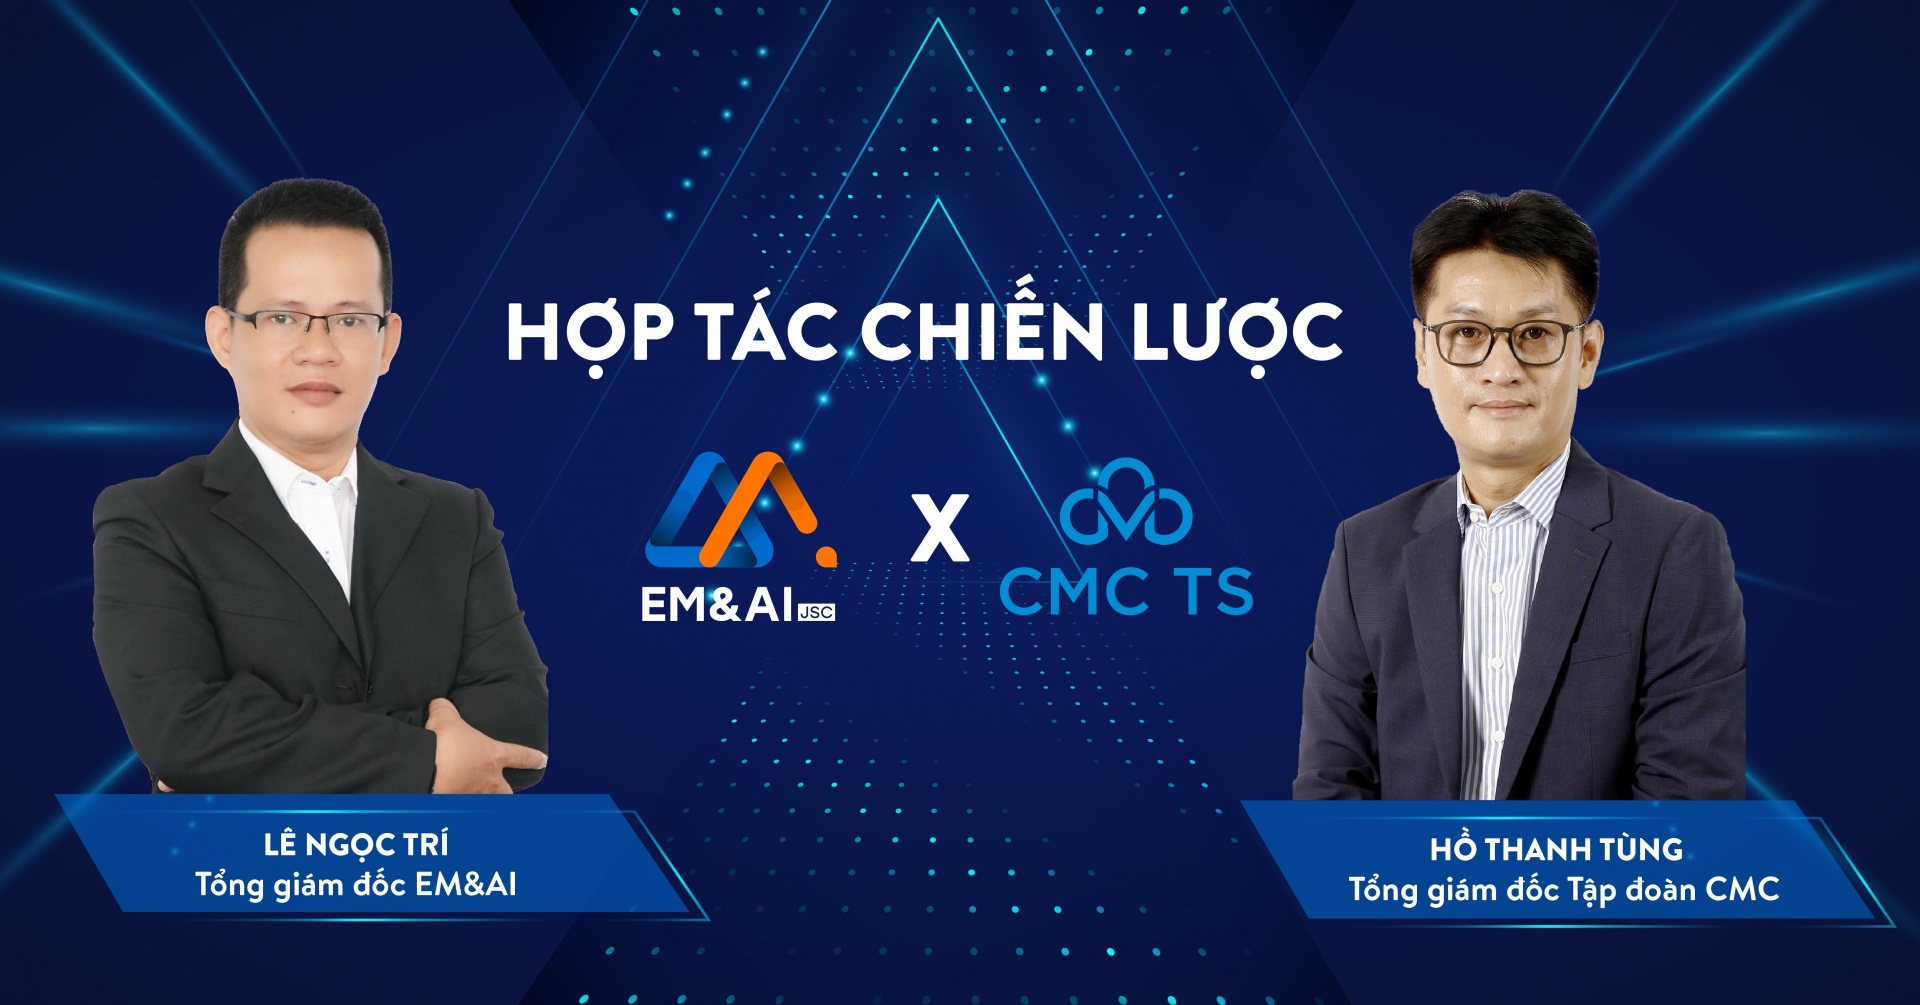 CMC TS and EM&AI in cooperation for artificial intelligence